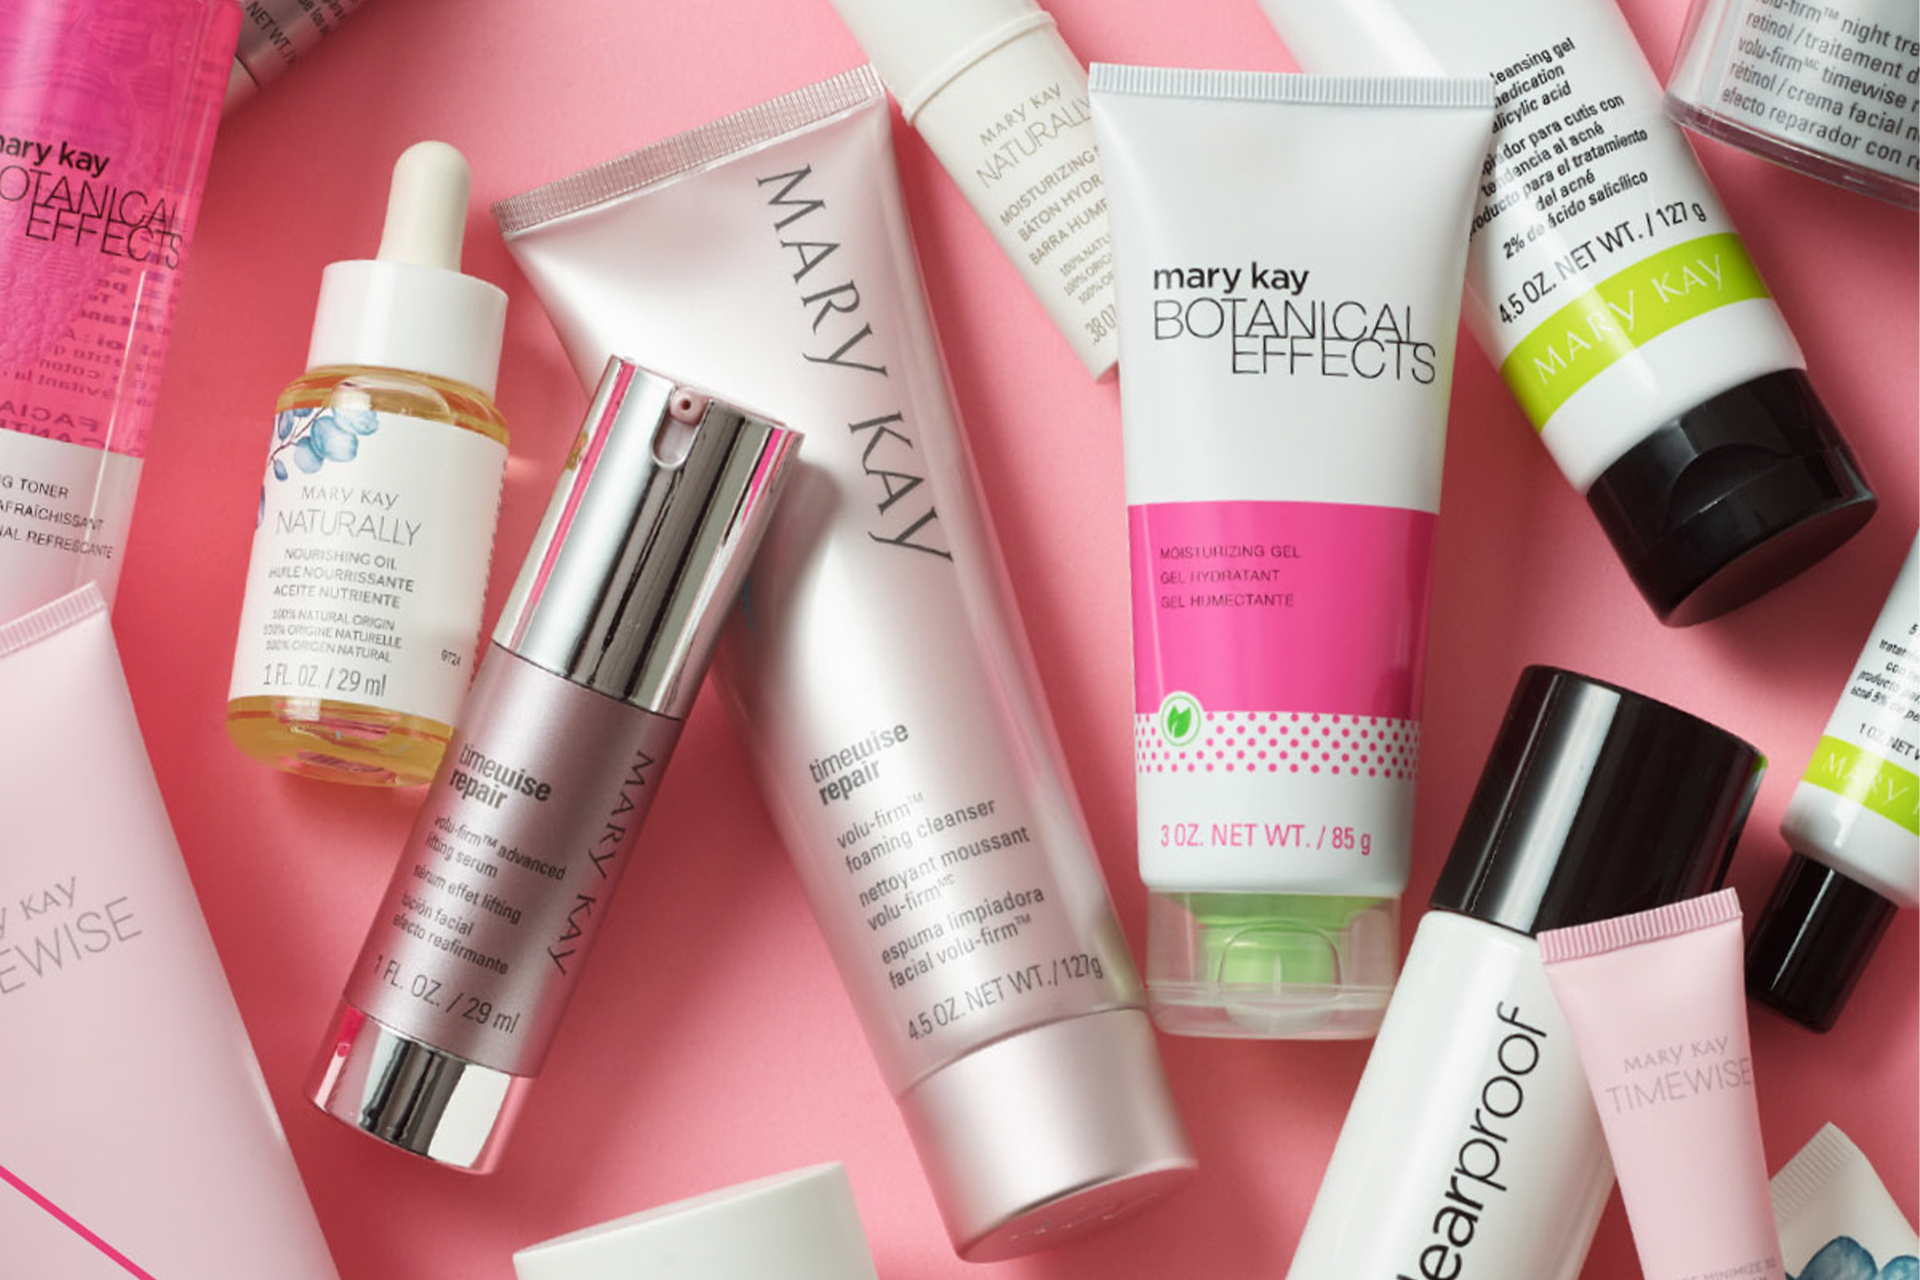 Collection of Mary Kay skincare products